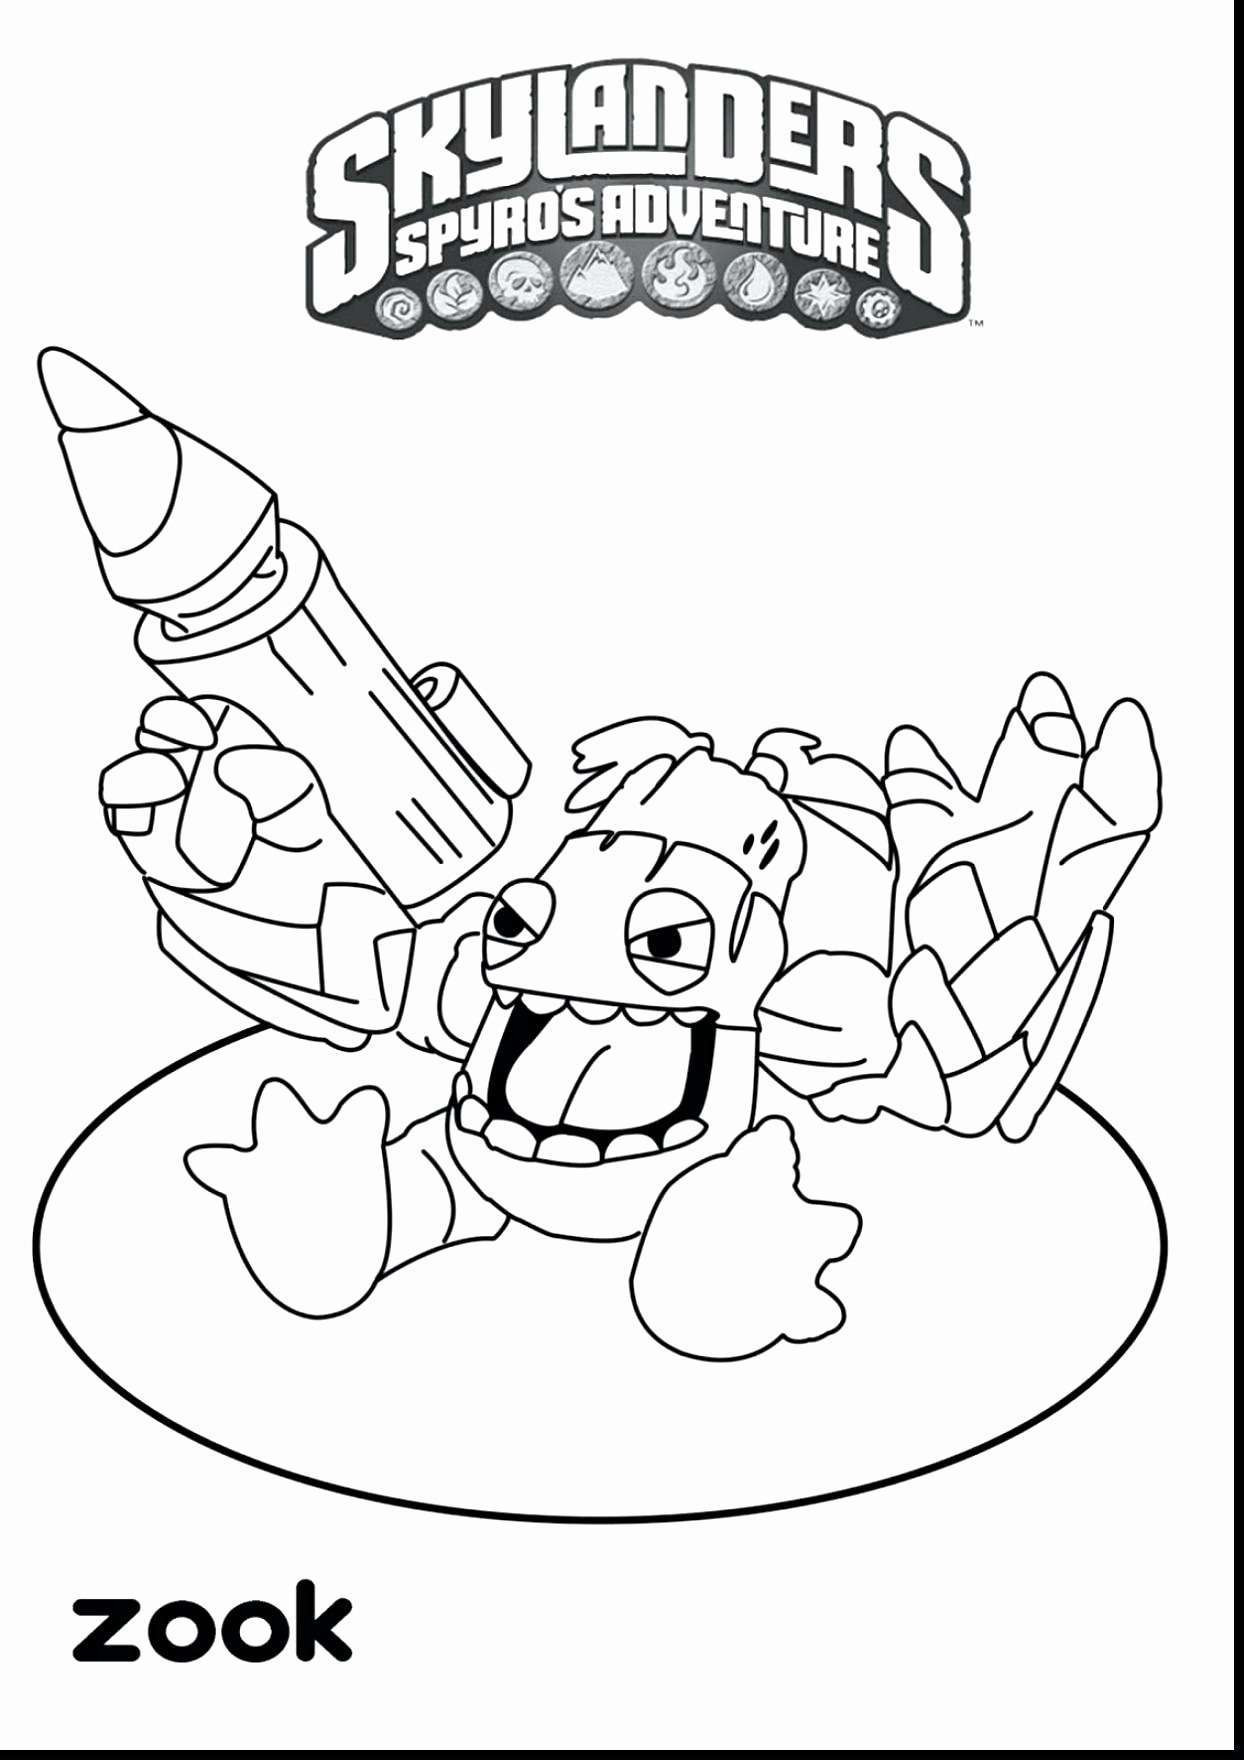 12 Famous Picture Of A Flower Vase to Color 2024 free download picture of a flower vase to color of coloring pages monkey vases flower vase coloring page pages flowers pertaining to coloring pages monkey 49 american girl coloring pages julie printable